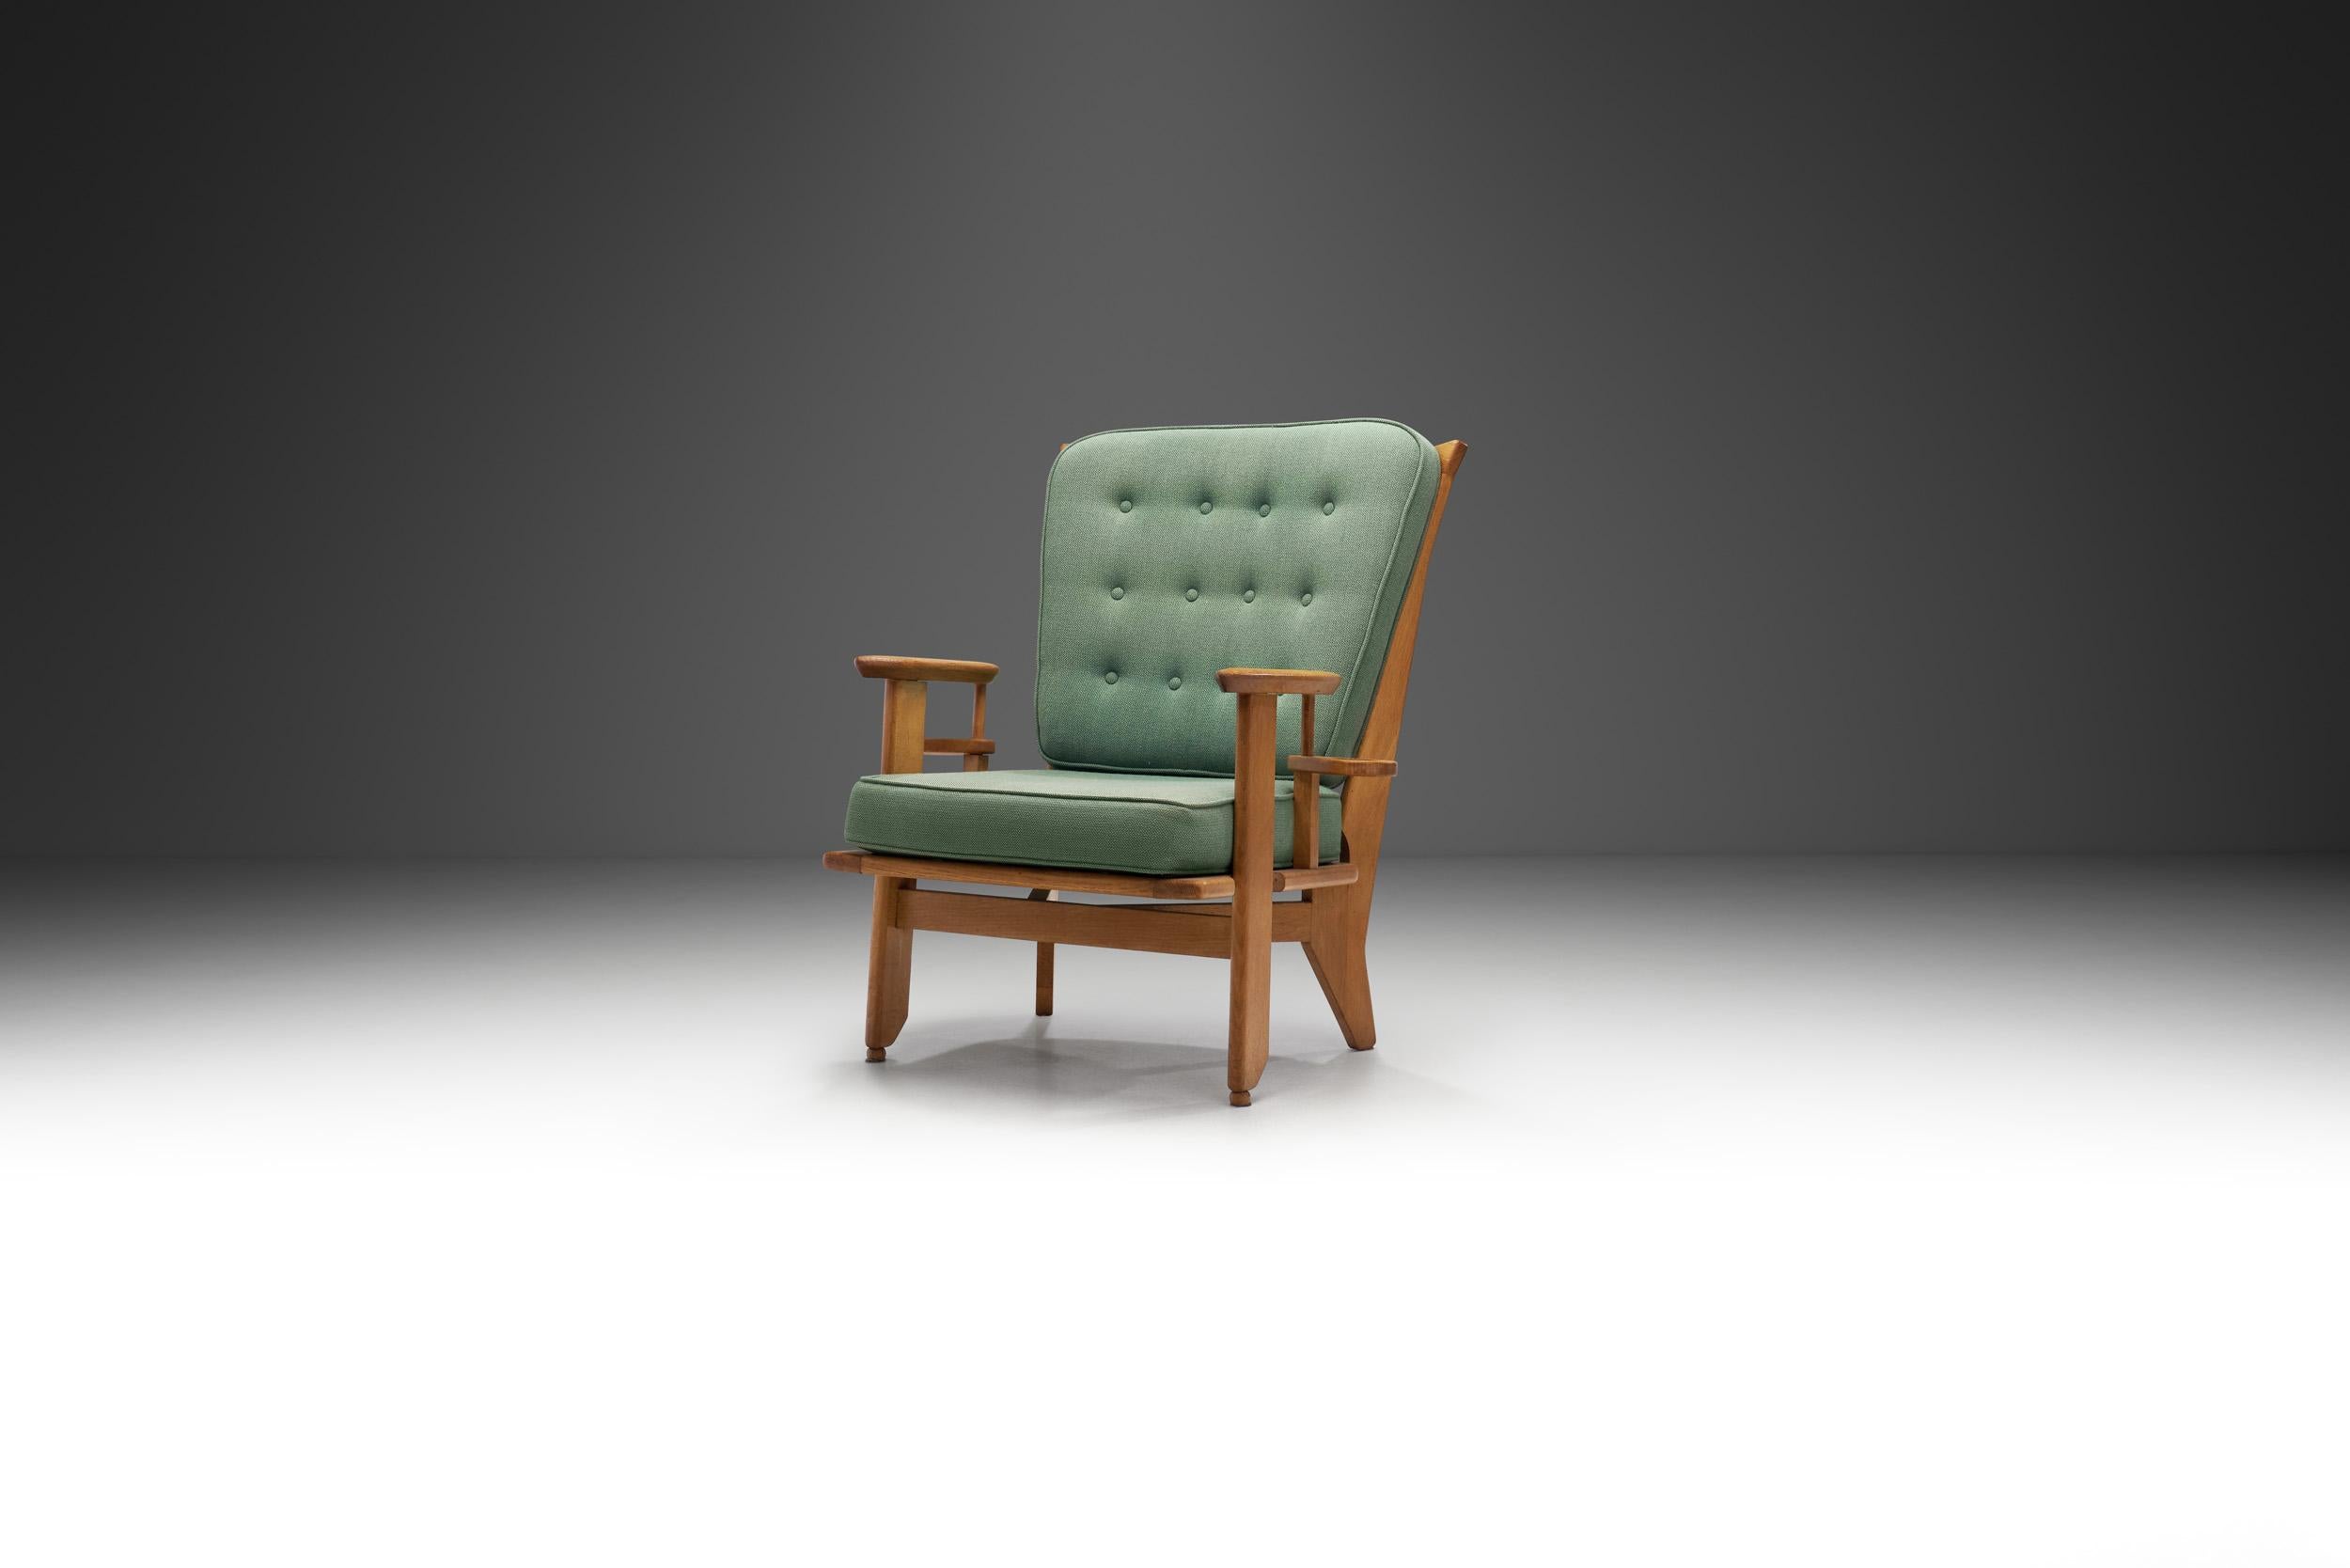 This rare oak “Gentleman” chair is a delightfully unique piece even if measured against the other seating models in the repertoire of the French designer duo, Robert Guillerme and Jacques Chambron. This model truly deserves the title of iconic, both